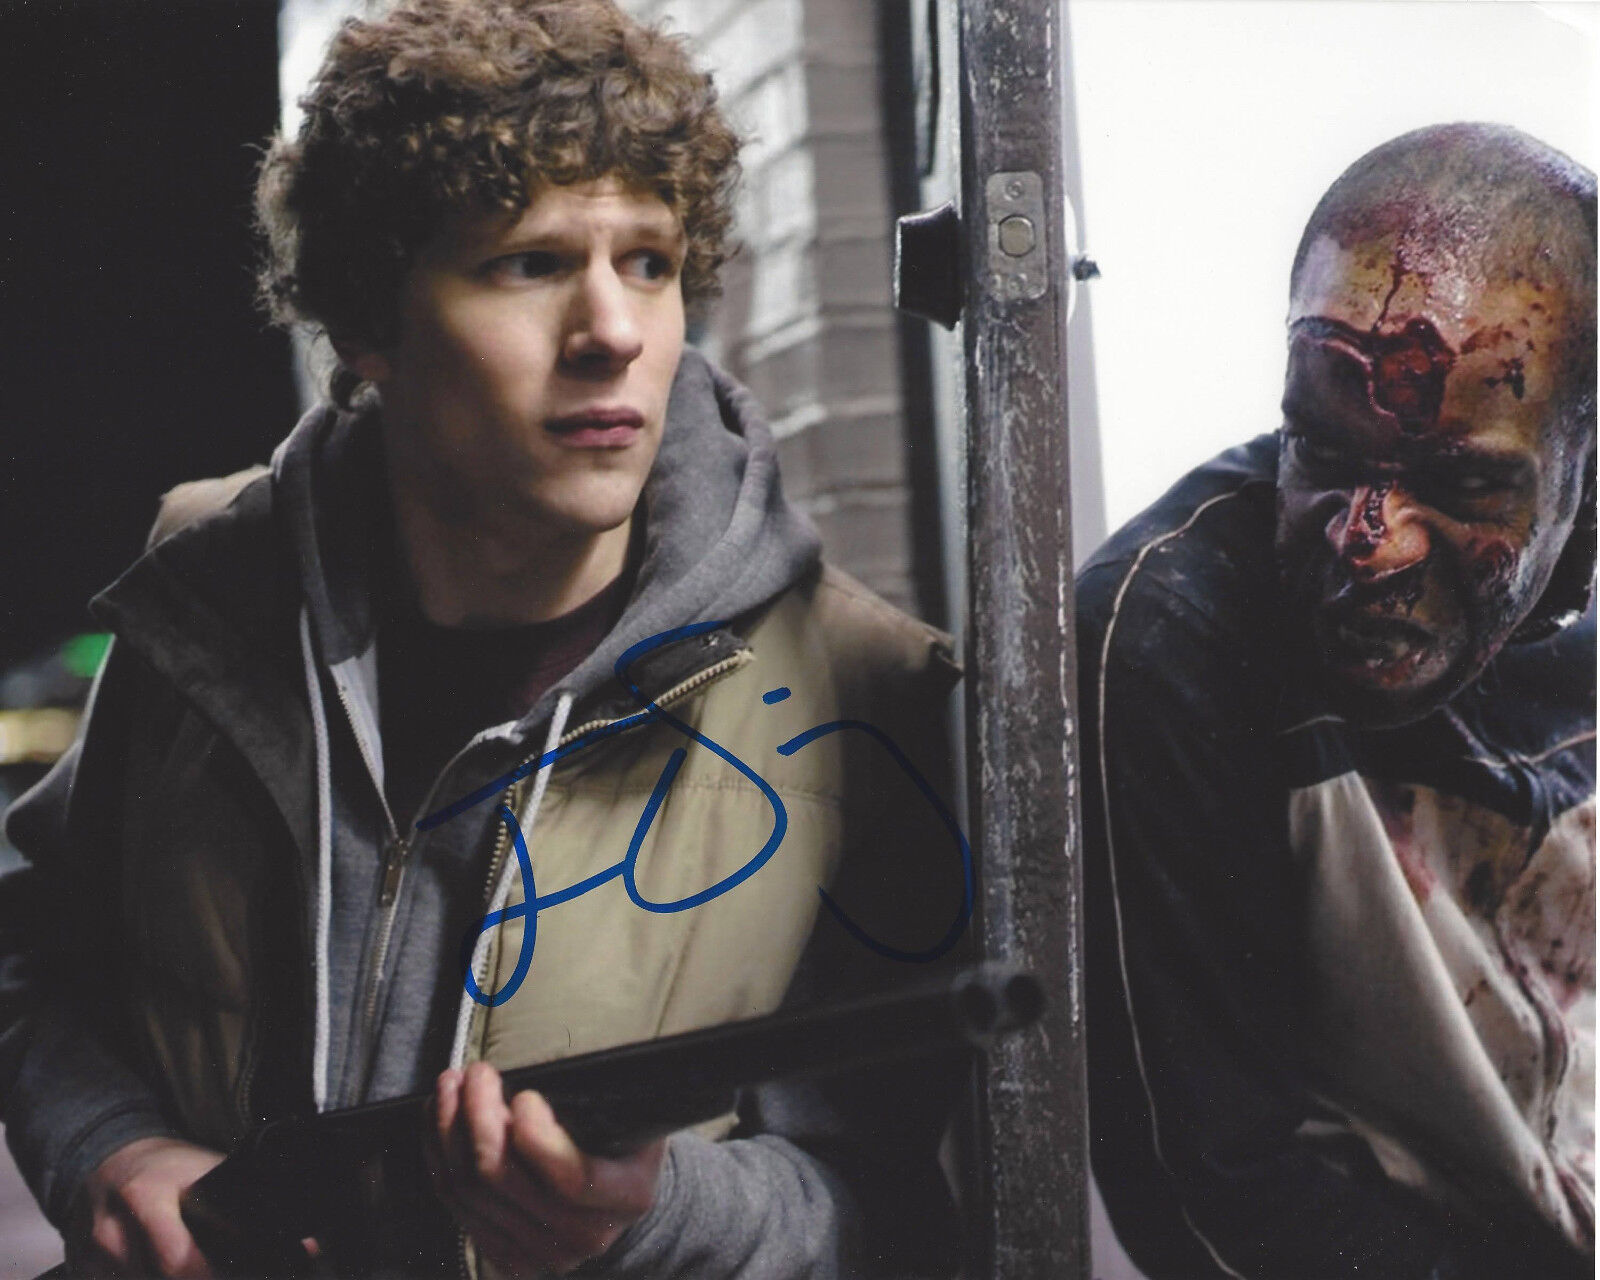 ACTOR JESSE EISENBERG SIGNED AUTOGRAPH 'ZOMBIELAND' 8x10 Photo Poster painting w/COA PROOF